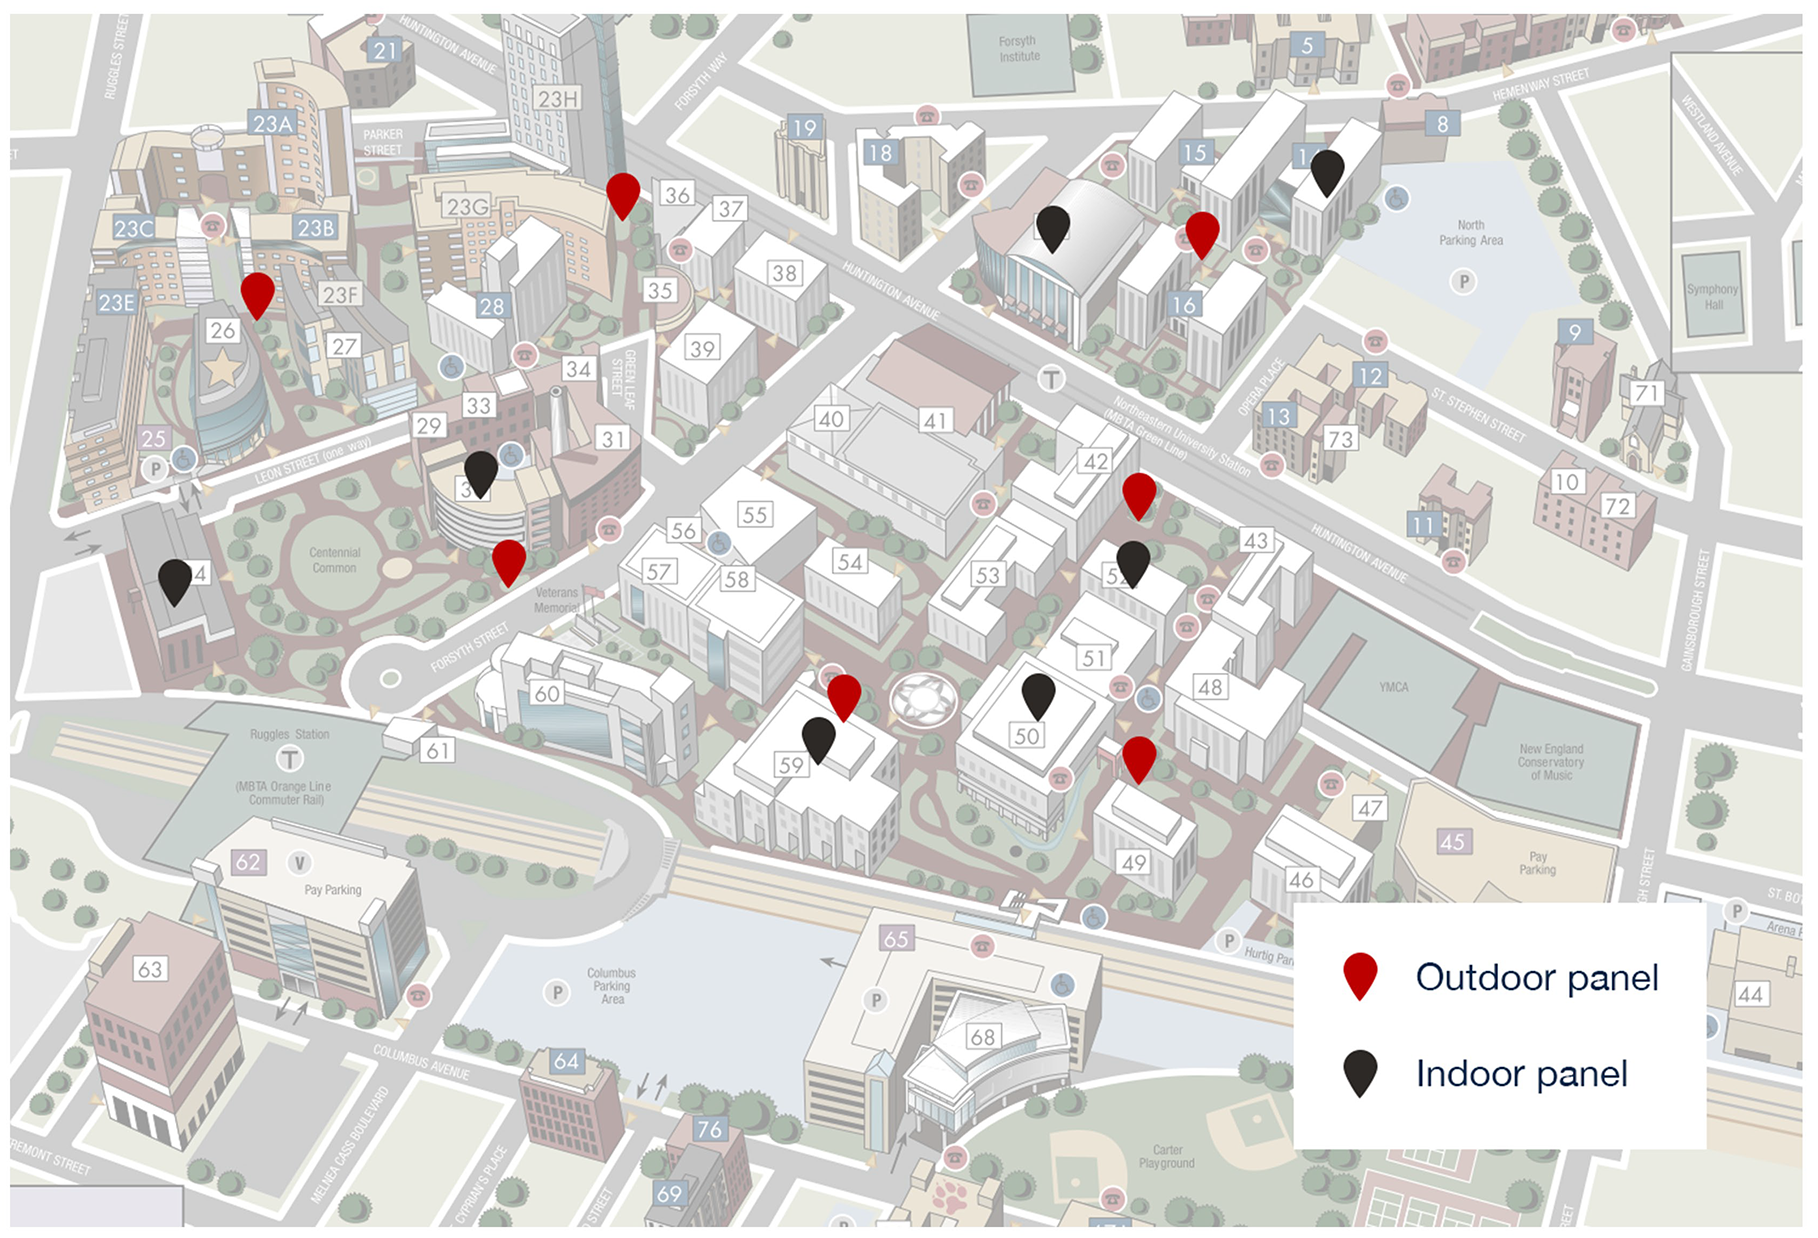 Map of northeastern's campus with outdoor and indoor screens marked on map.